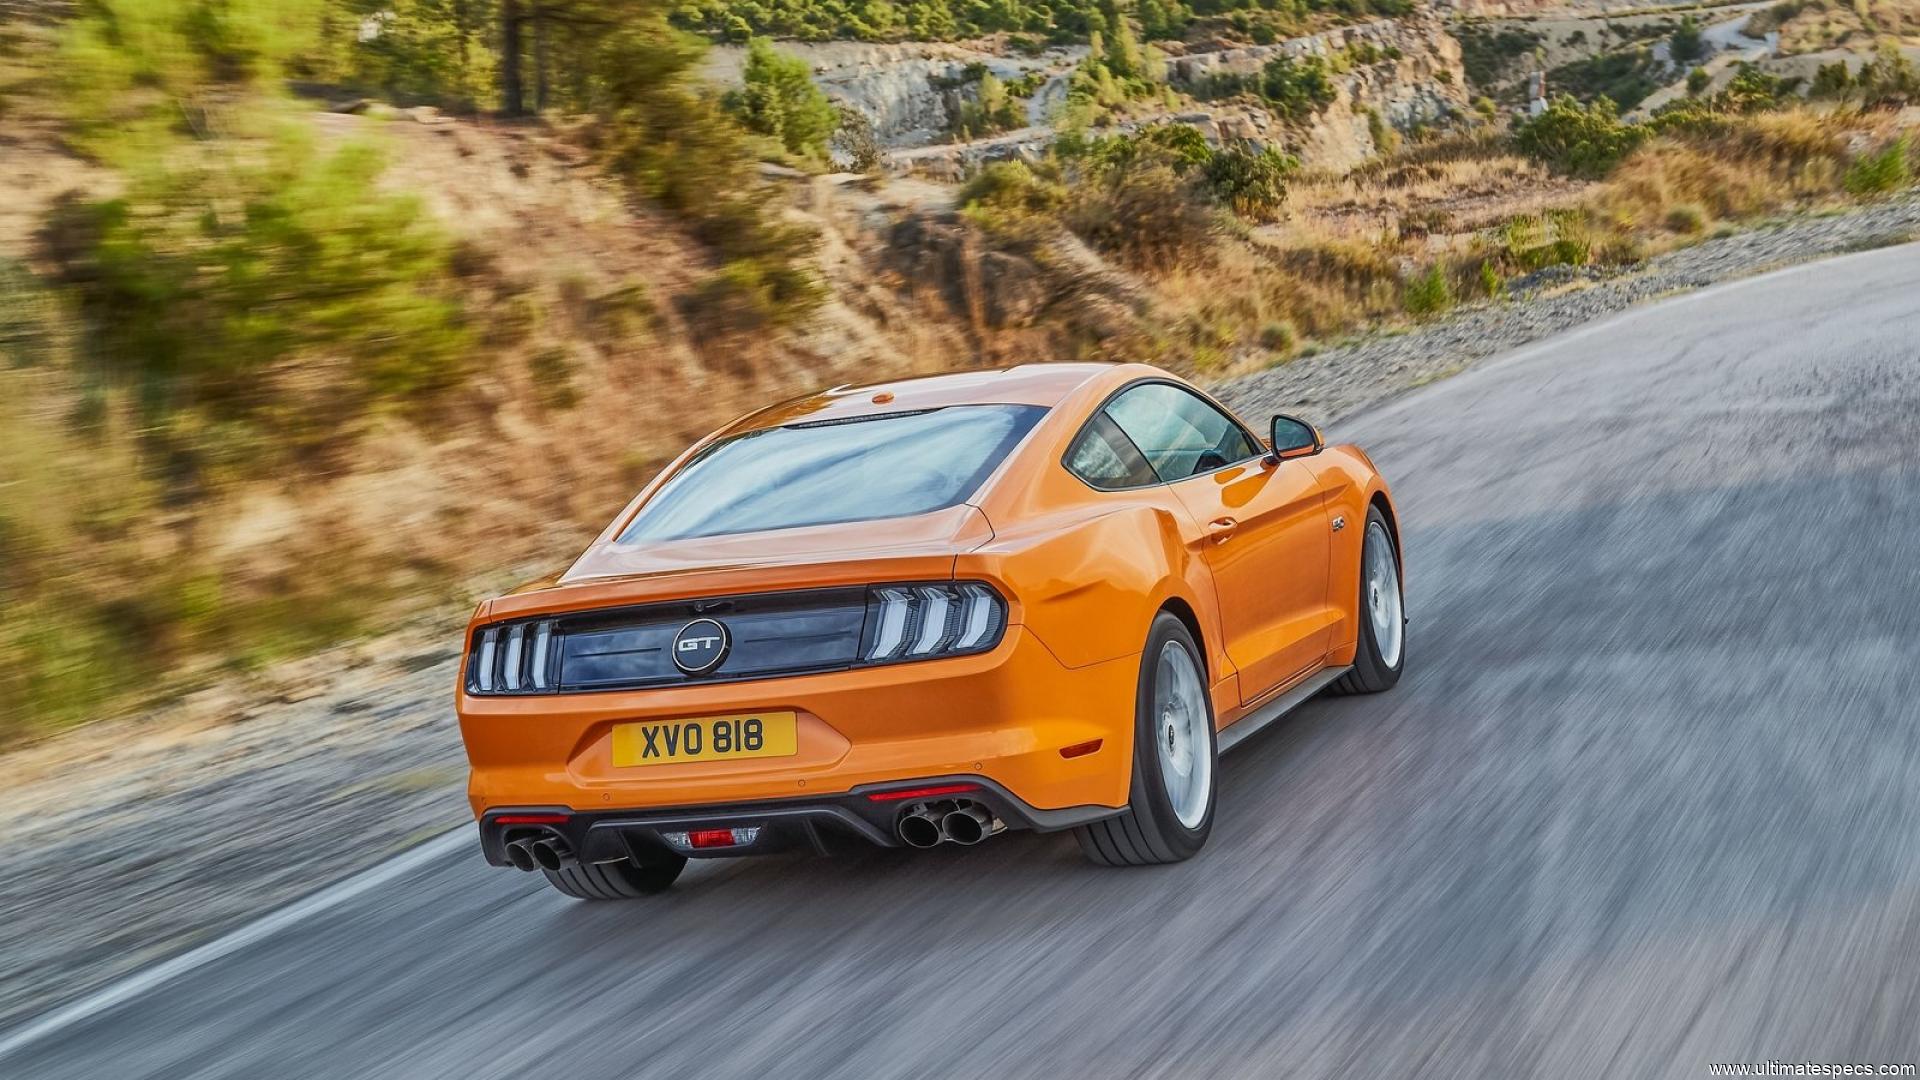 Ford Mustang 6 2018 Fastback